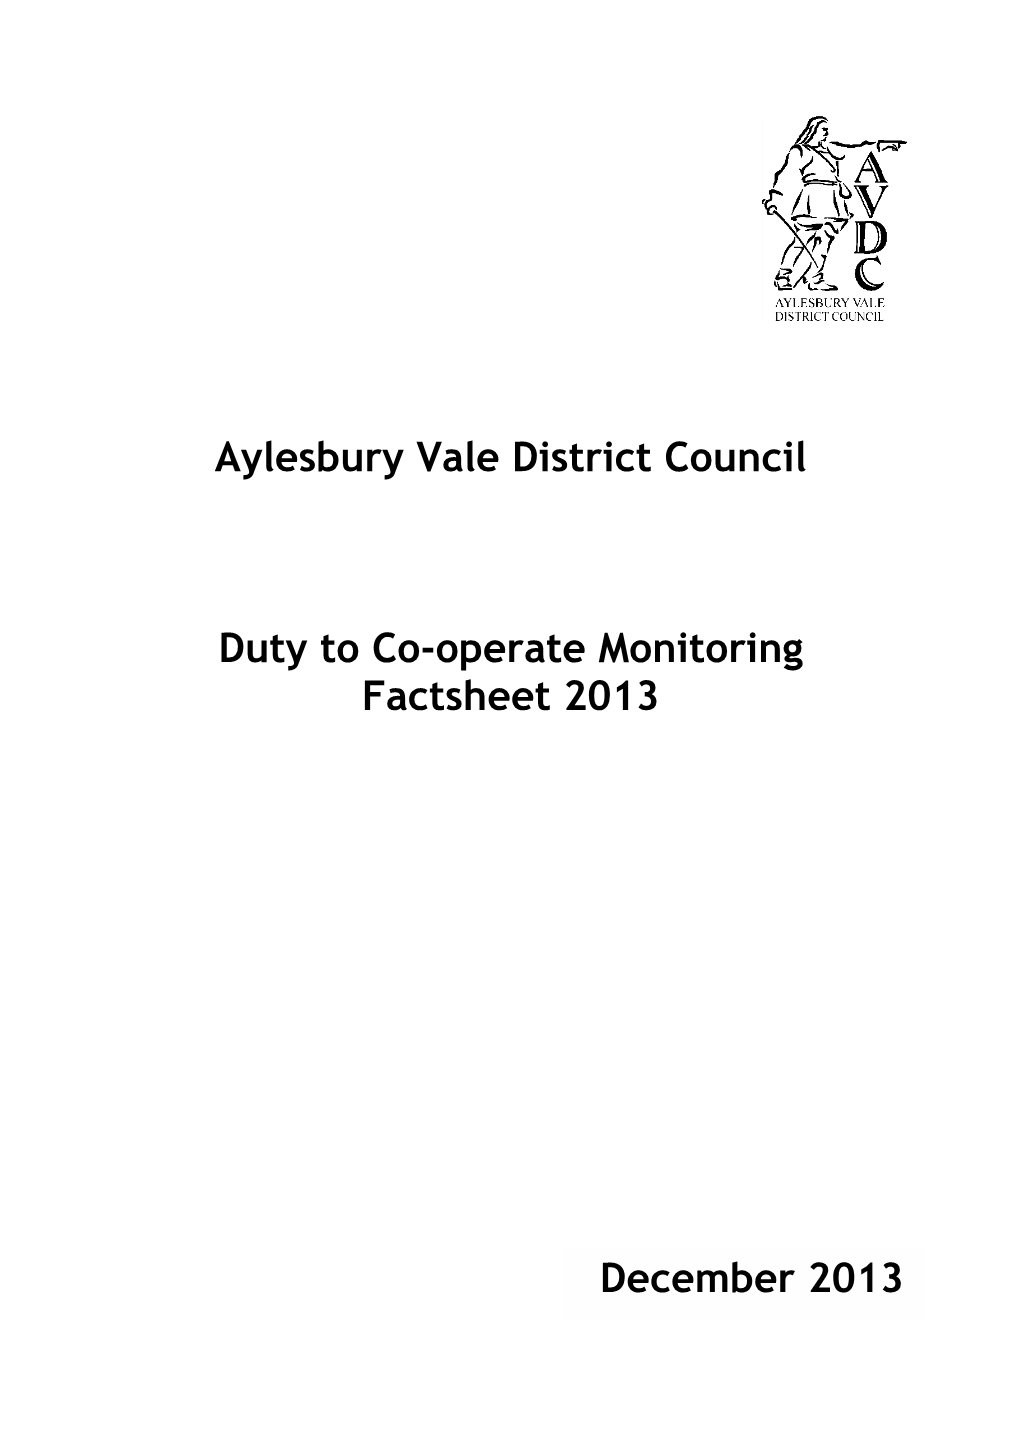 Aylesbury Vale District Council Duty to Co-Operate Monitoring Factsheet